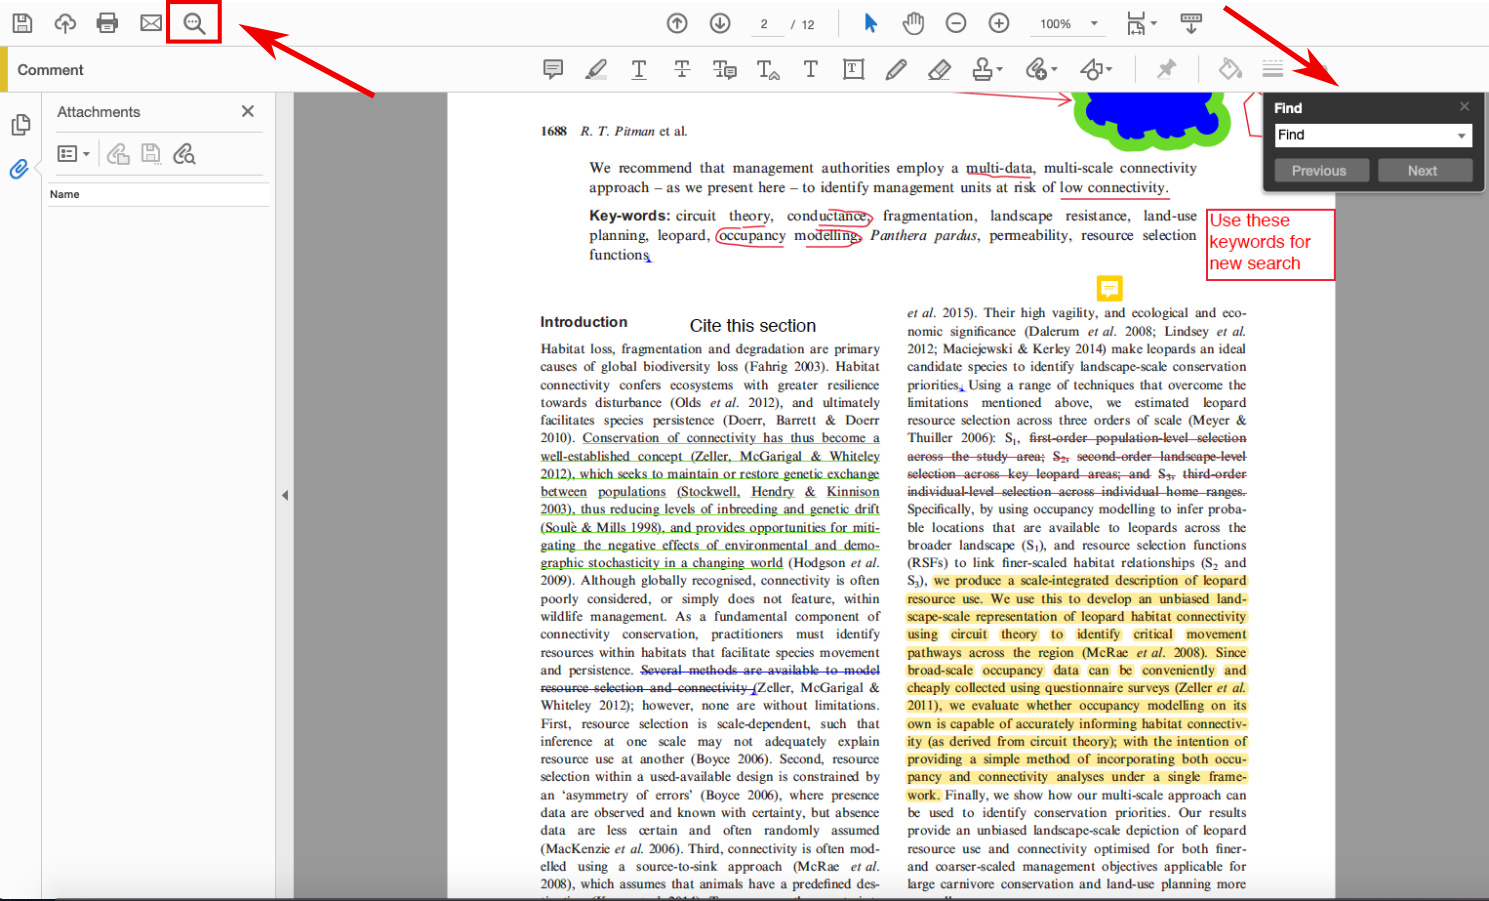 In this screenshot of the same document, the magnifying glass in the top left of the window is in a red box and has a red arrow pointing to it. In the upper-right is a small pop-up window with the text "find" at the top and a white bar for typing text. Below the bar for text are two gray buttons that read "previous" and "next."